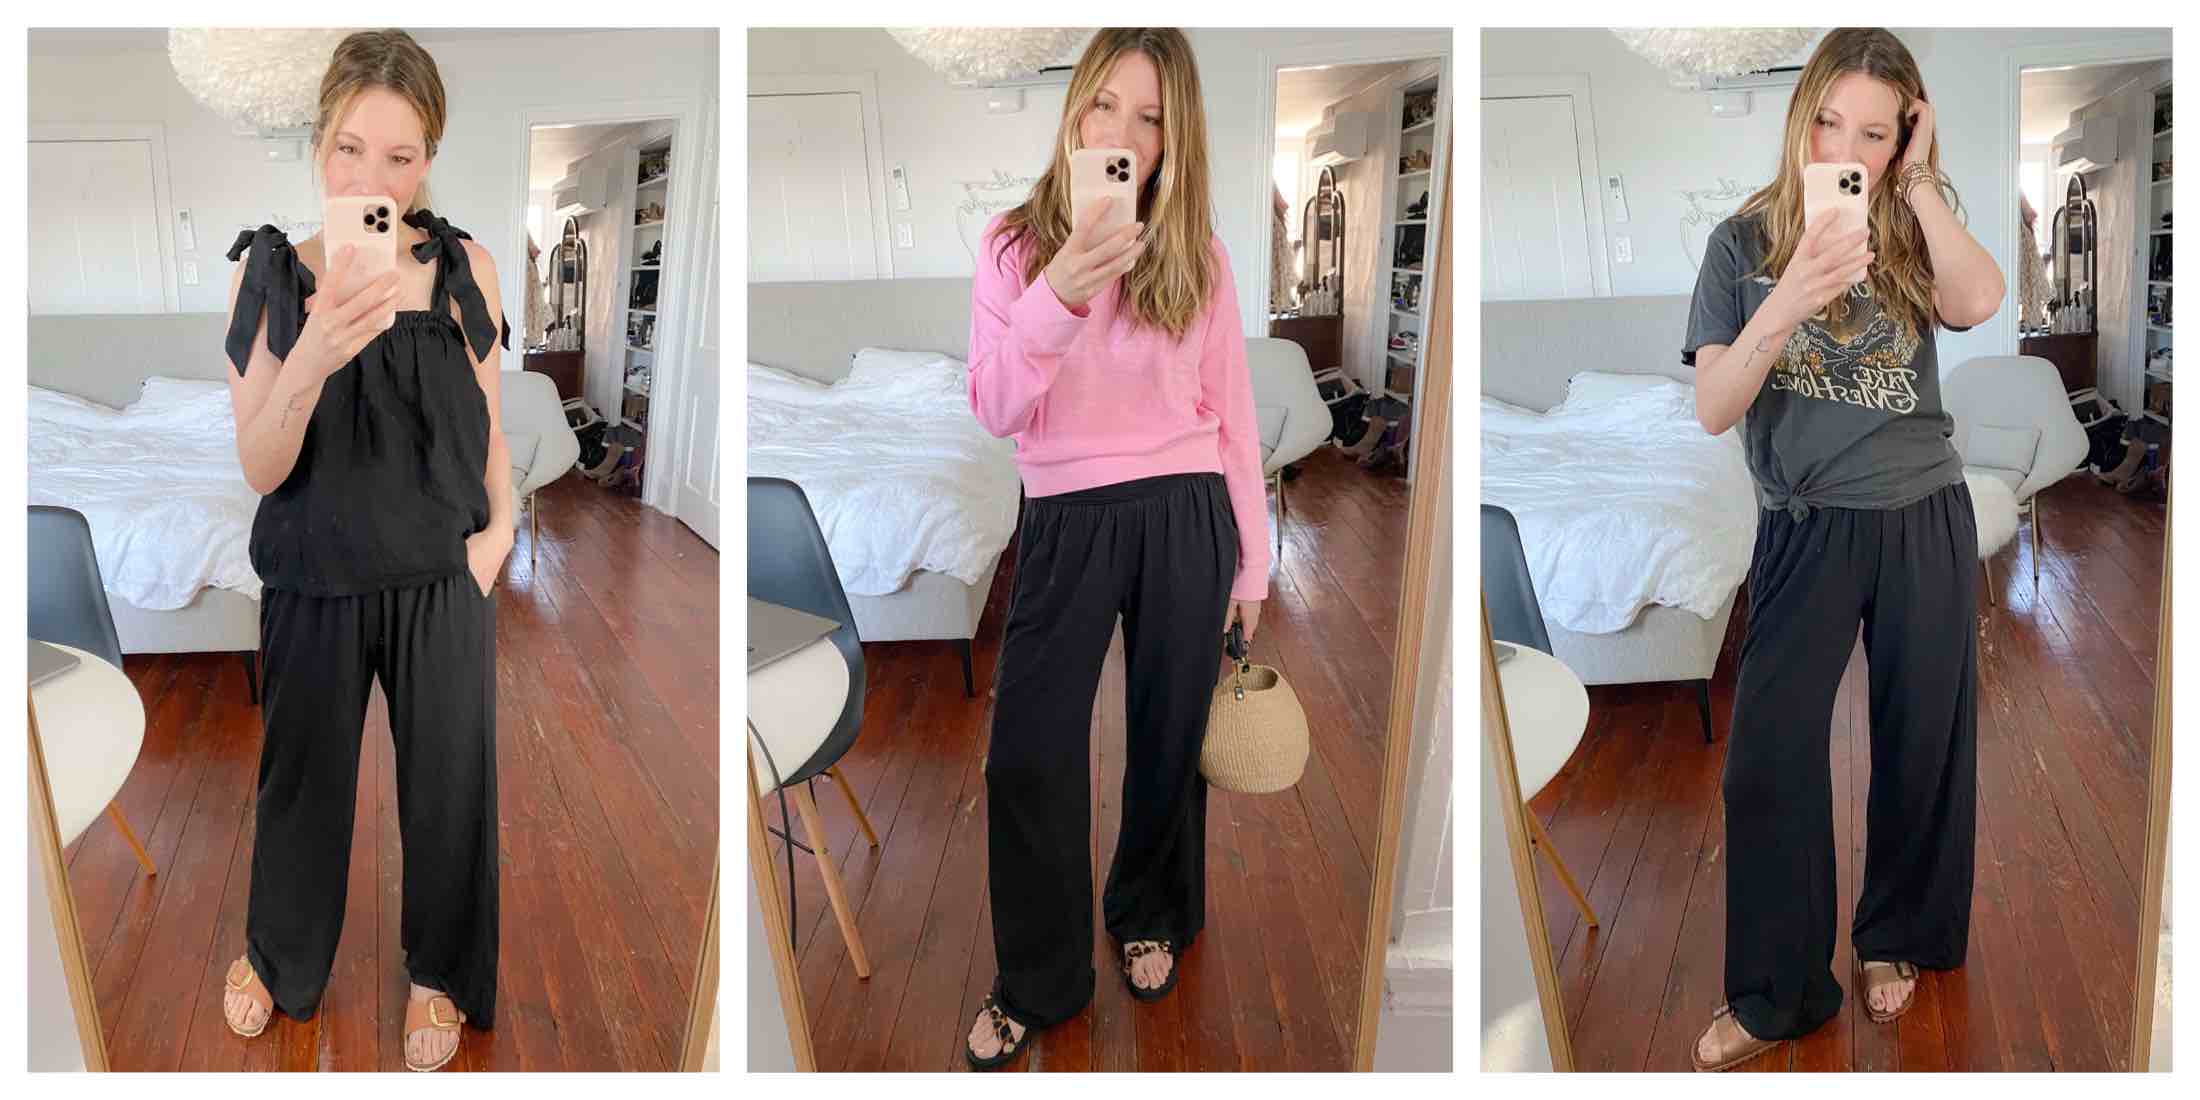 How To Style Wide Leg Sweatpants? – solowomen